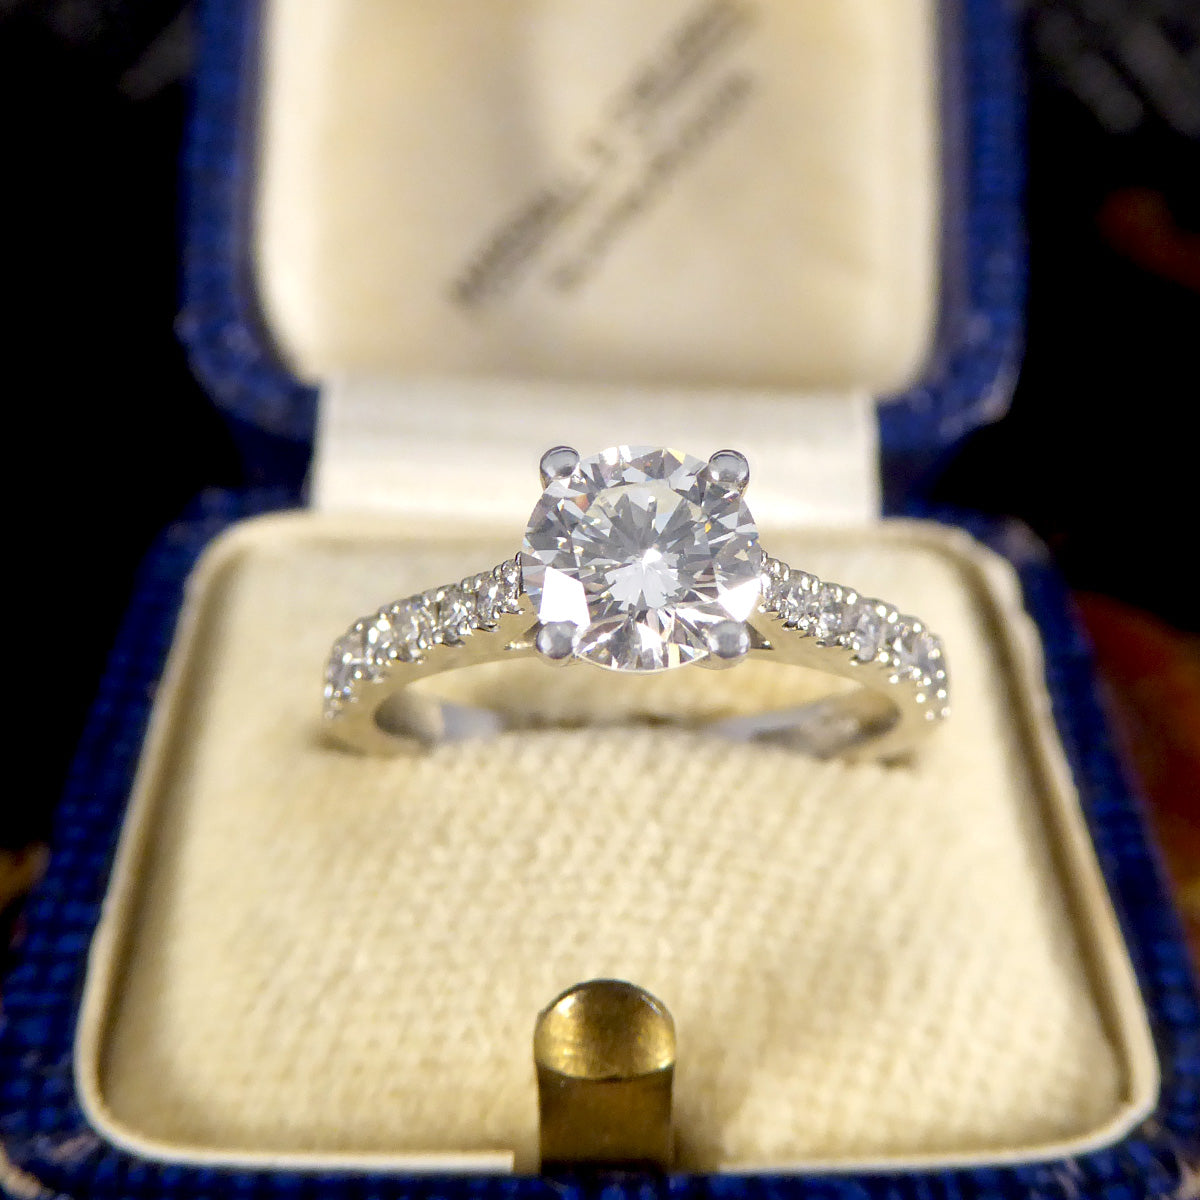 0.85ct Diamond Solitaire Engagement Ring with Diamond Set Shoulders in Platinum